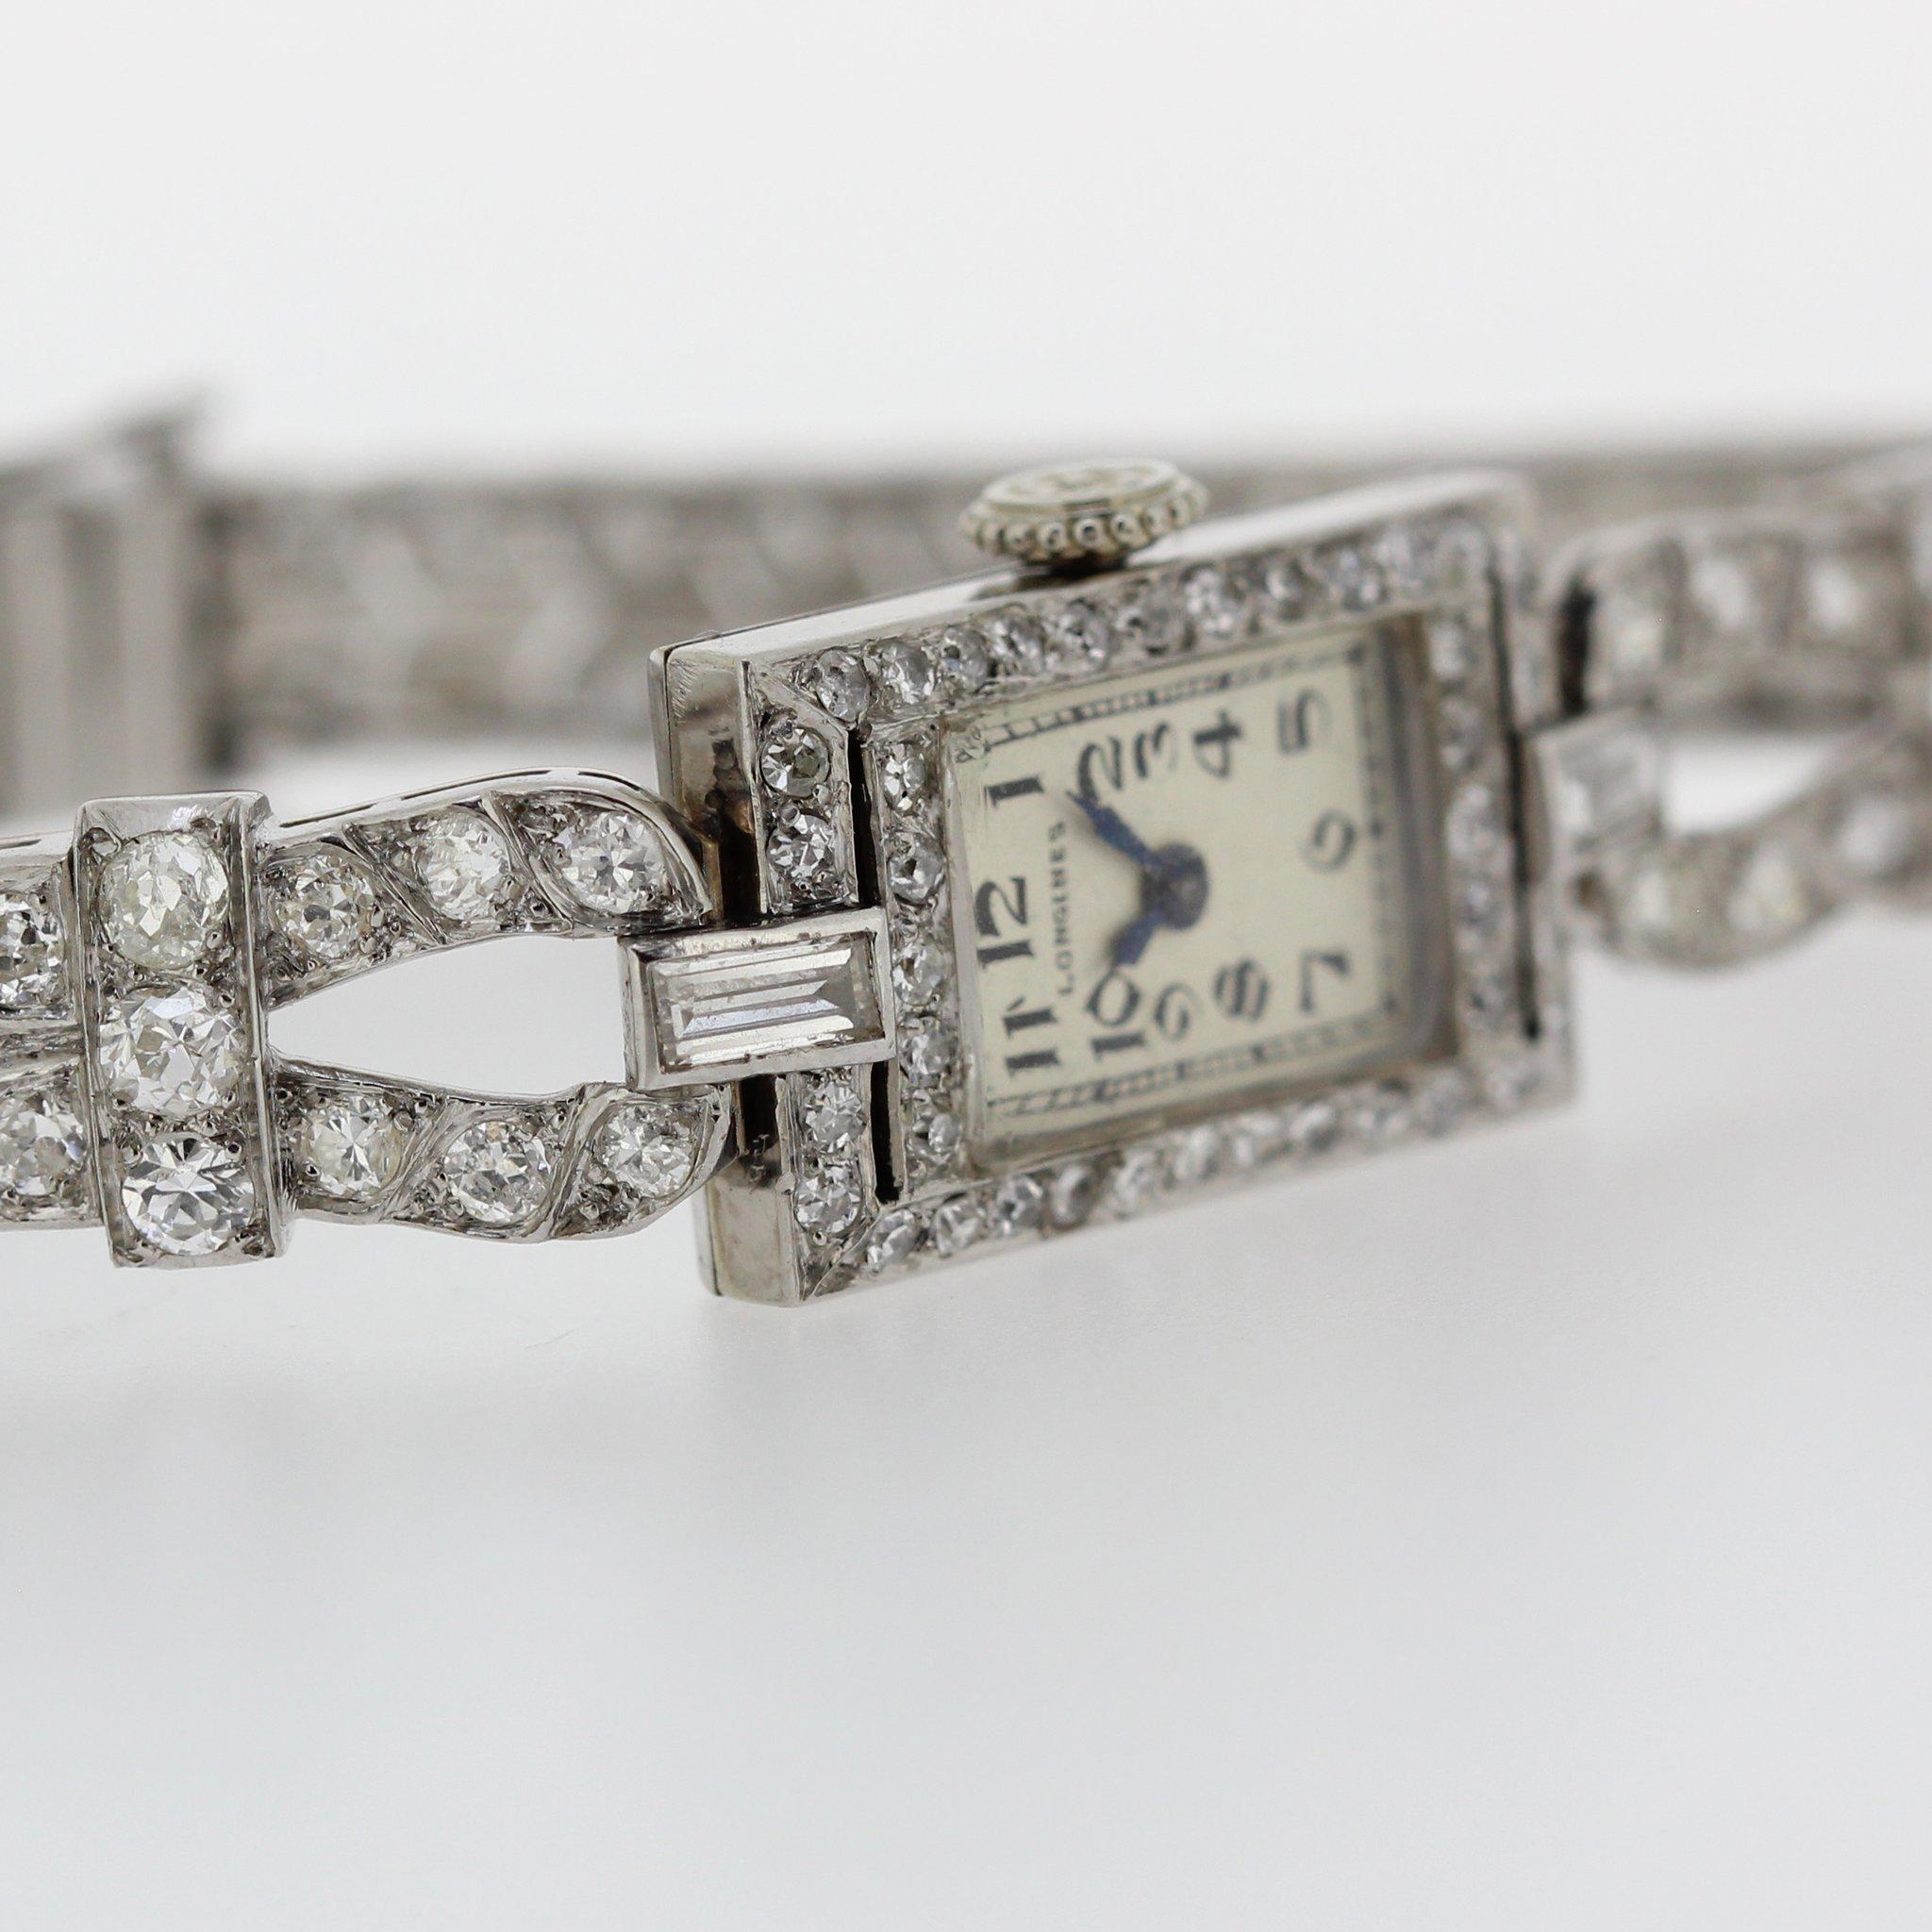 Introduction:
This Longines Art Deco Platinum and diamond ladies watch, circa 1930-1940, features a  rectangular shaped baguette case, pave set with 136 diamonds to total approximately 6.5 carats. Case and movement stamped with 4663851. 

About Us: